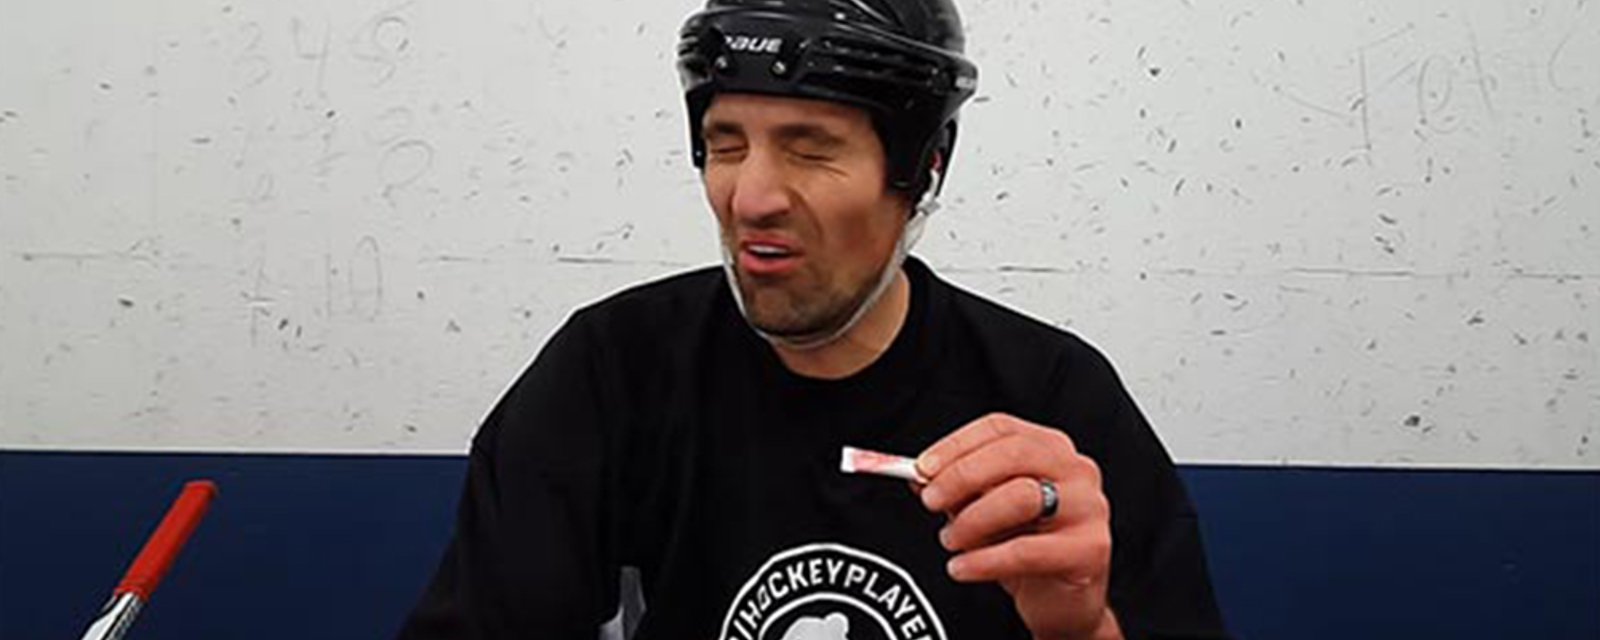 Watch beer leaguers try smelling salts